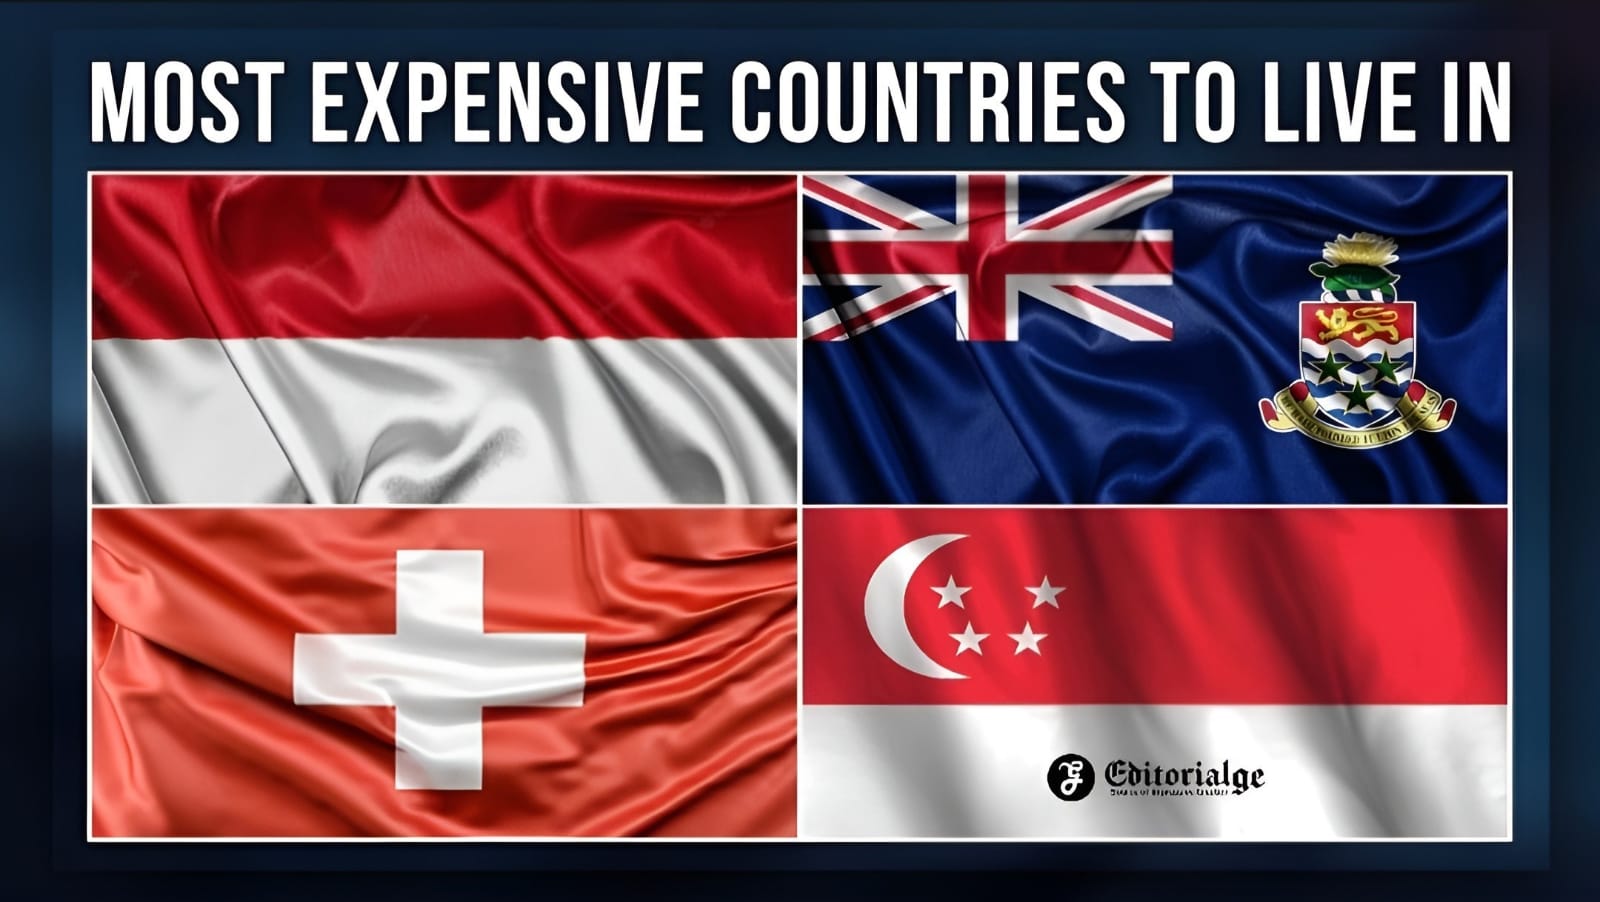 Most Expensive Countries to Live In